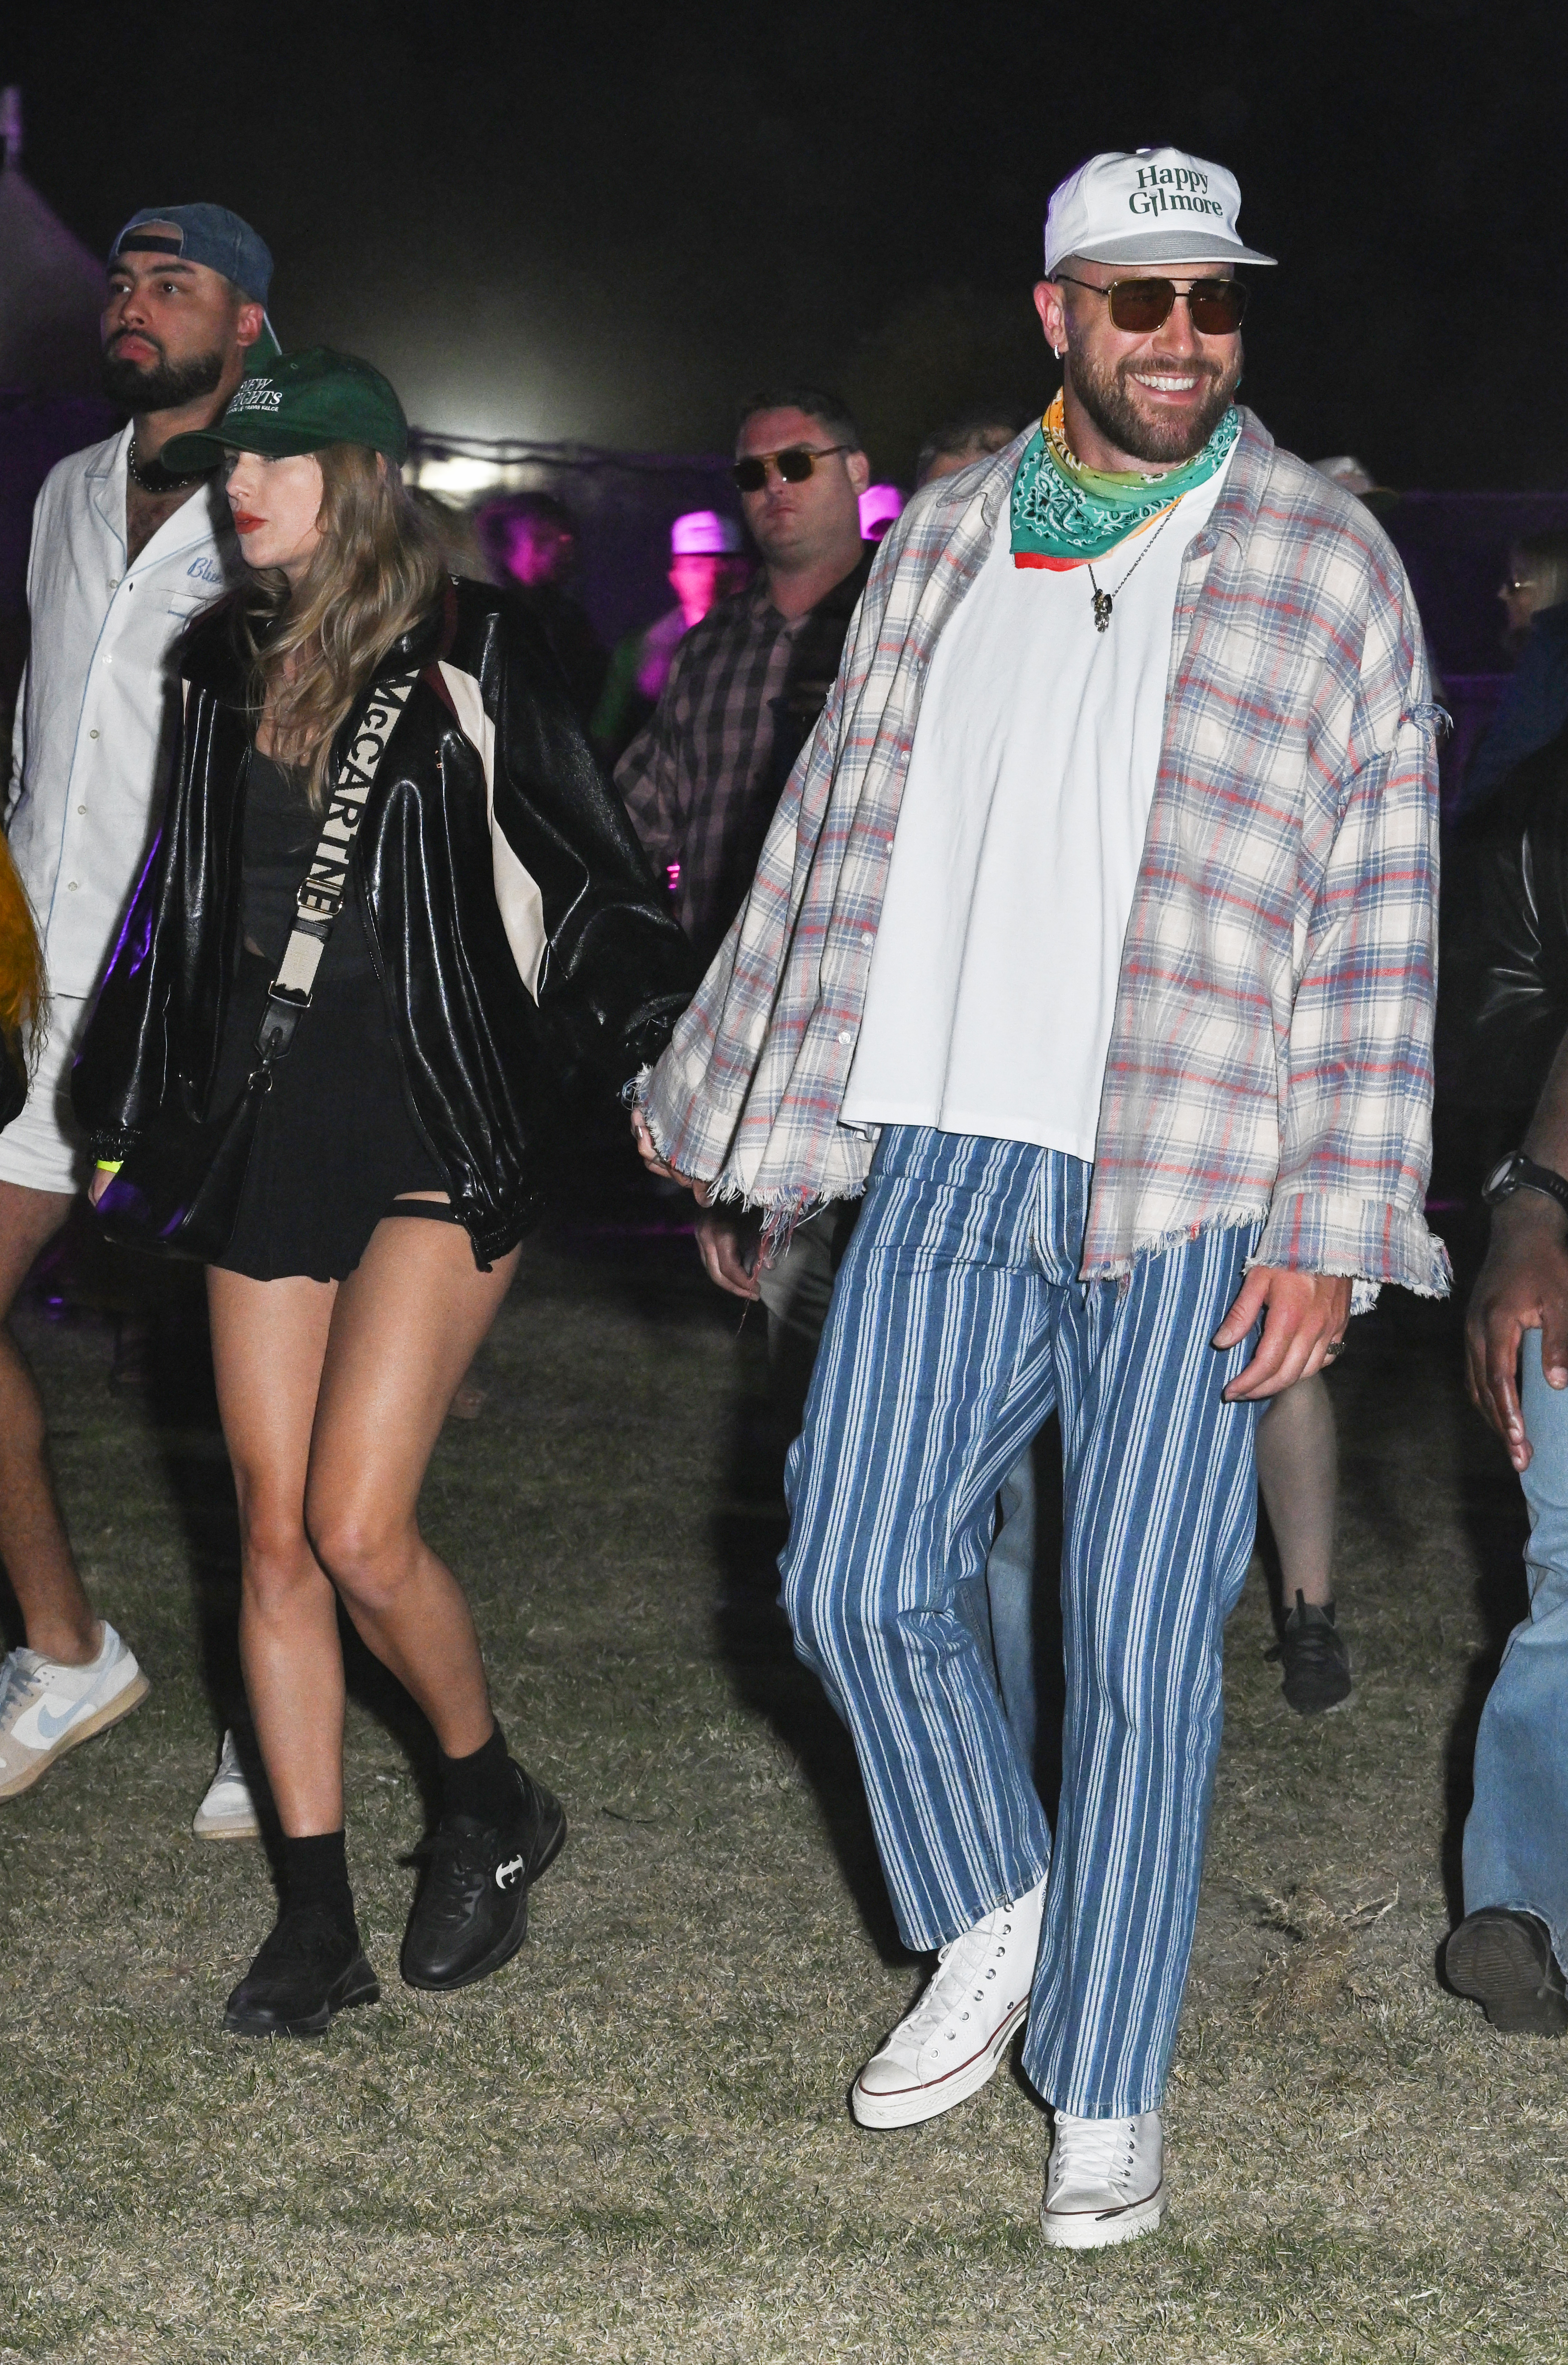 Taylor and her boyfriend Travis Kelce supported her friends as they performed on stage at the popular music festival